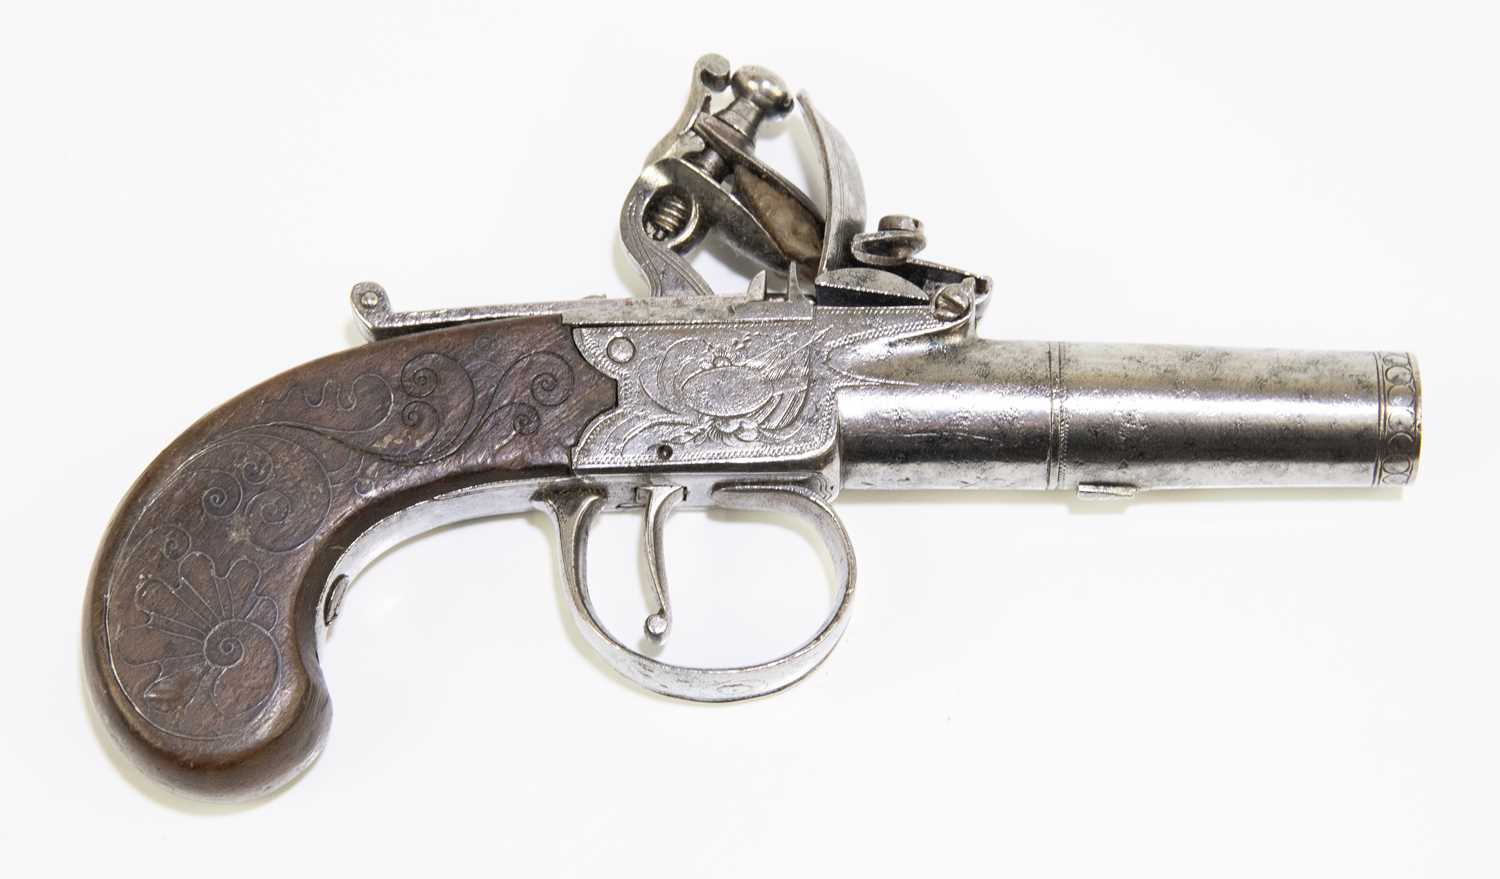 A late 18th/early 19th century flintlock muff pistol, the 1.5" screw-off barrel mounted to the